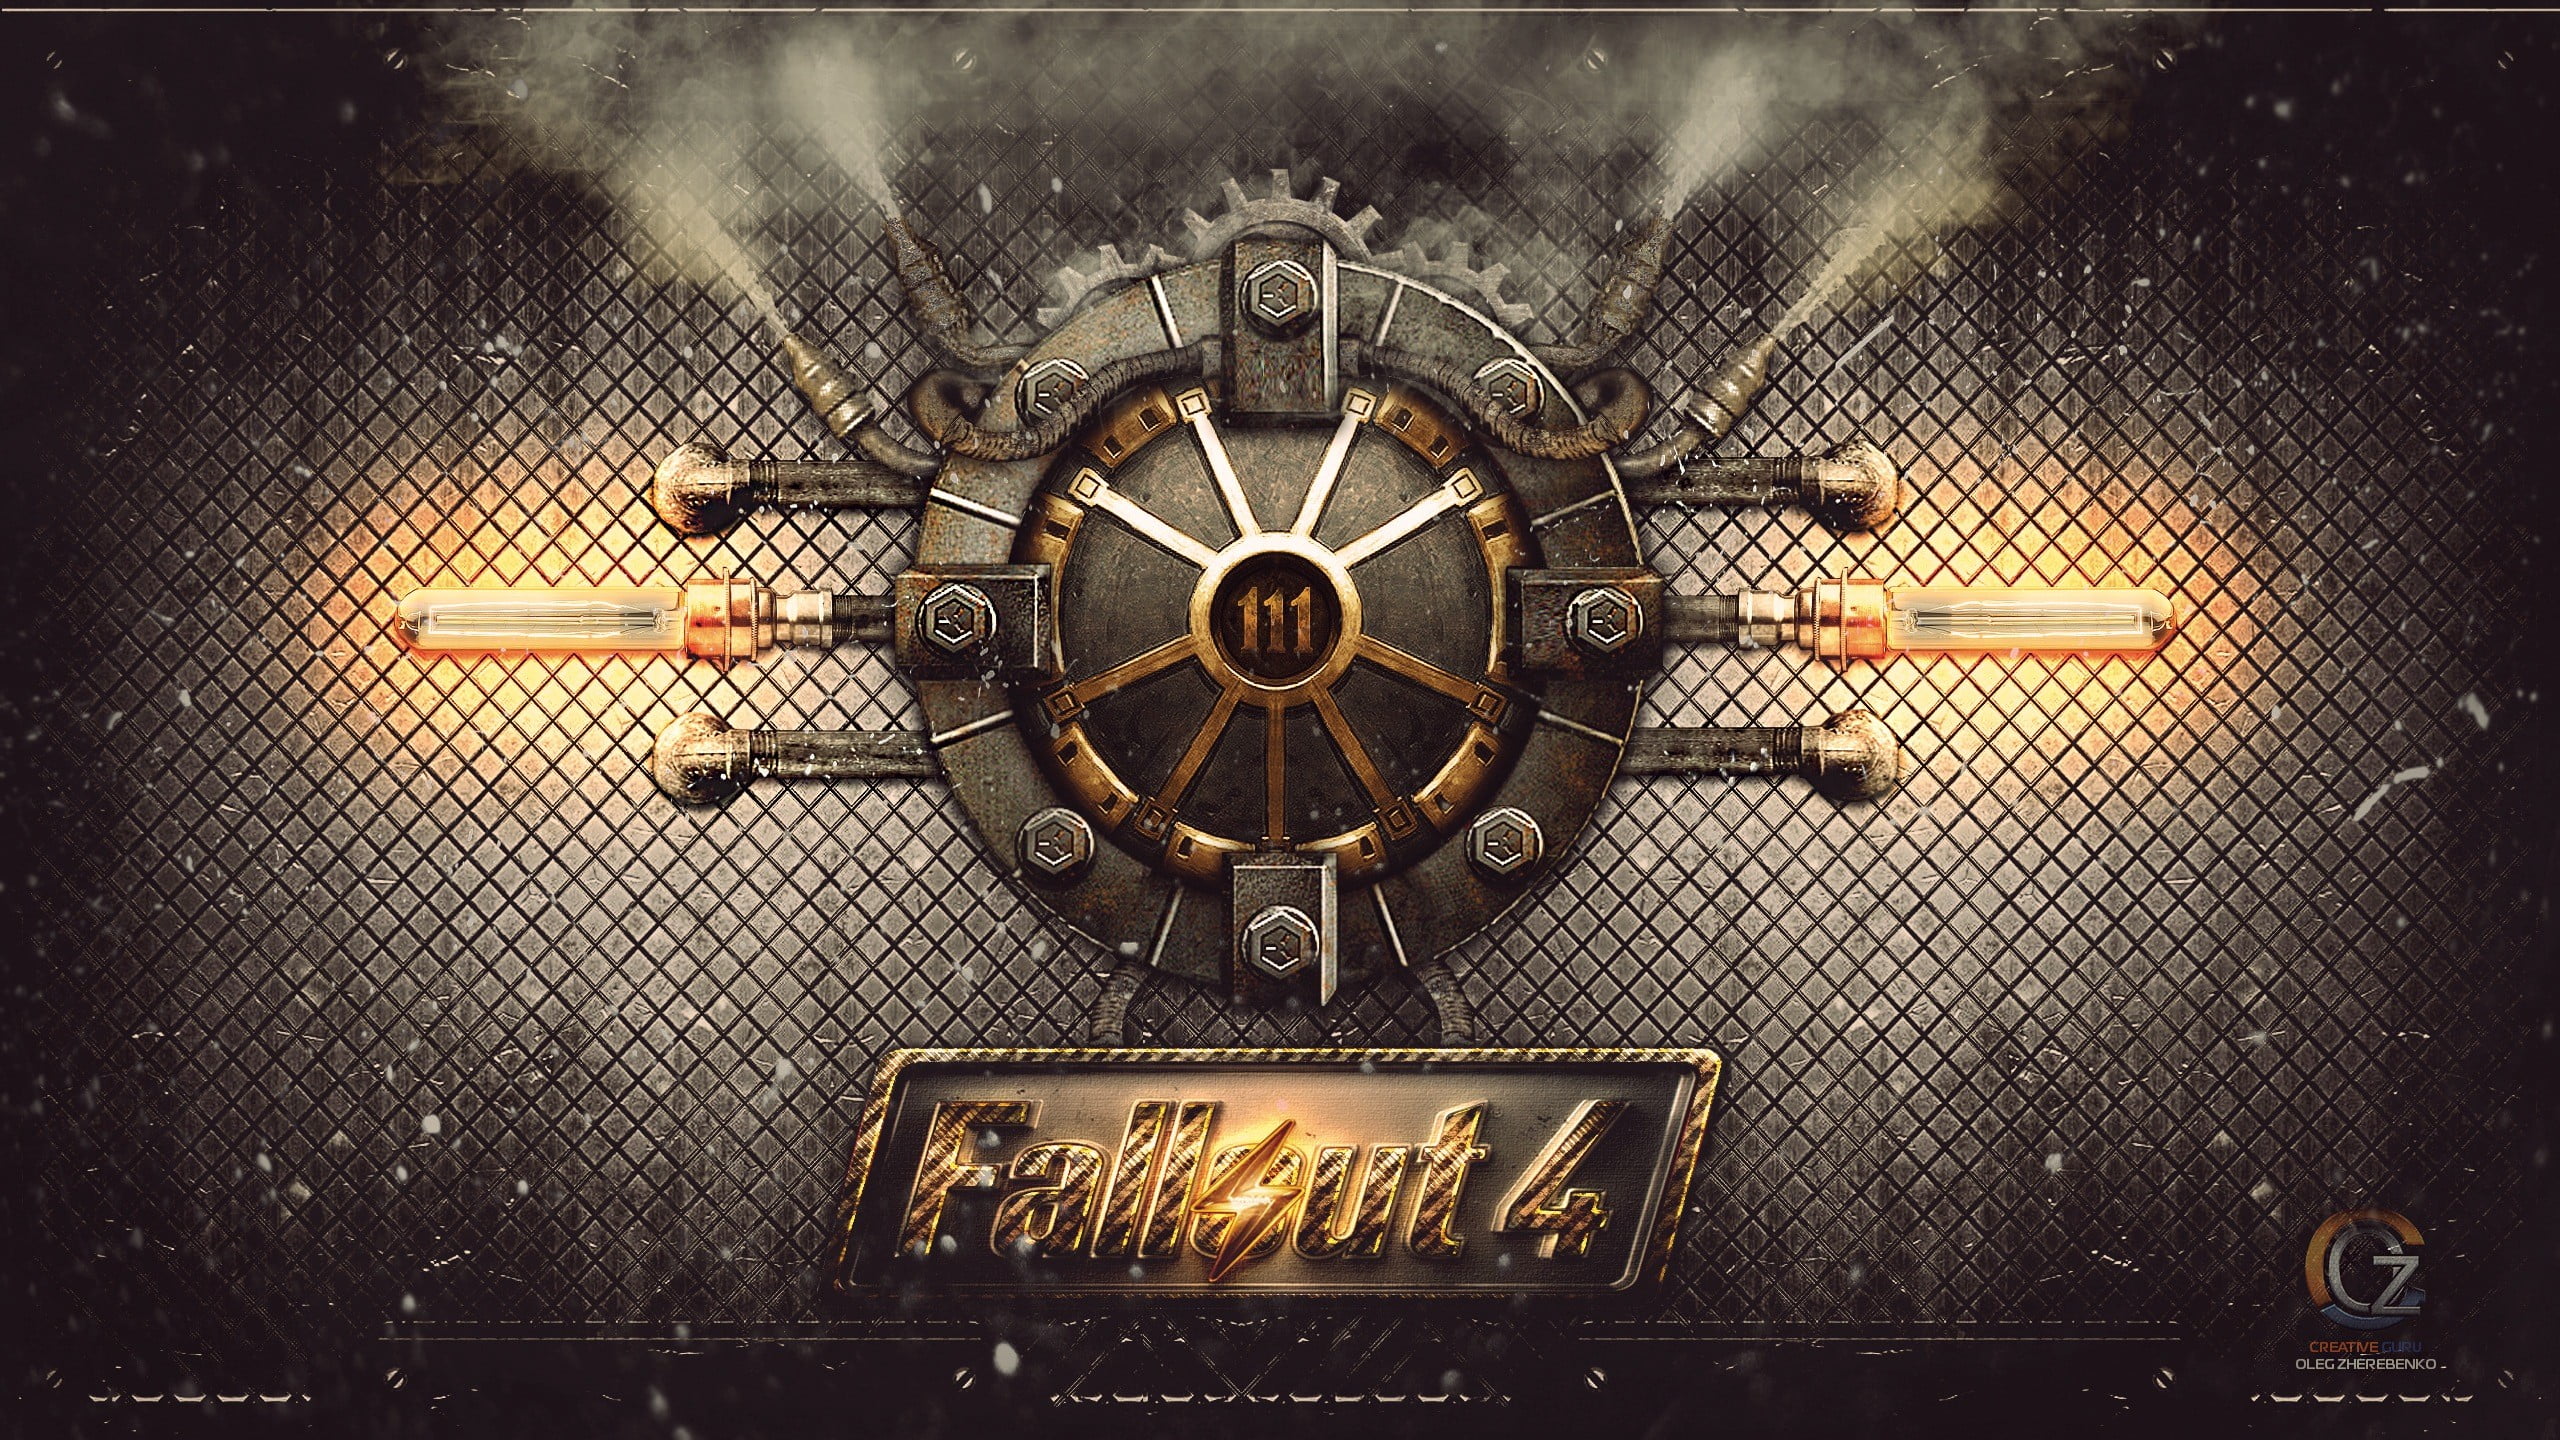 Fallout 4 wallpaper, backgrounds, metal, steel, retro Styled